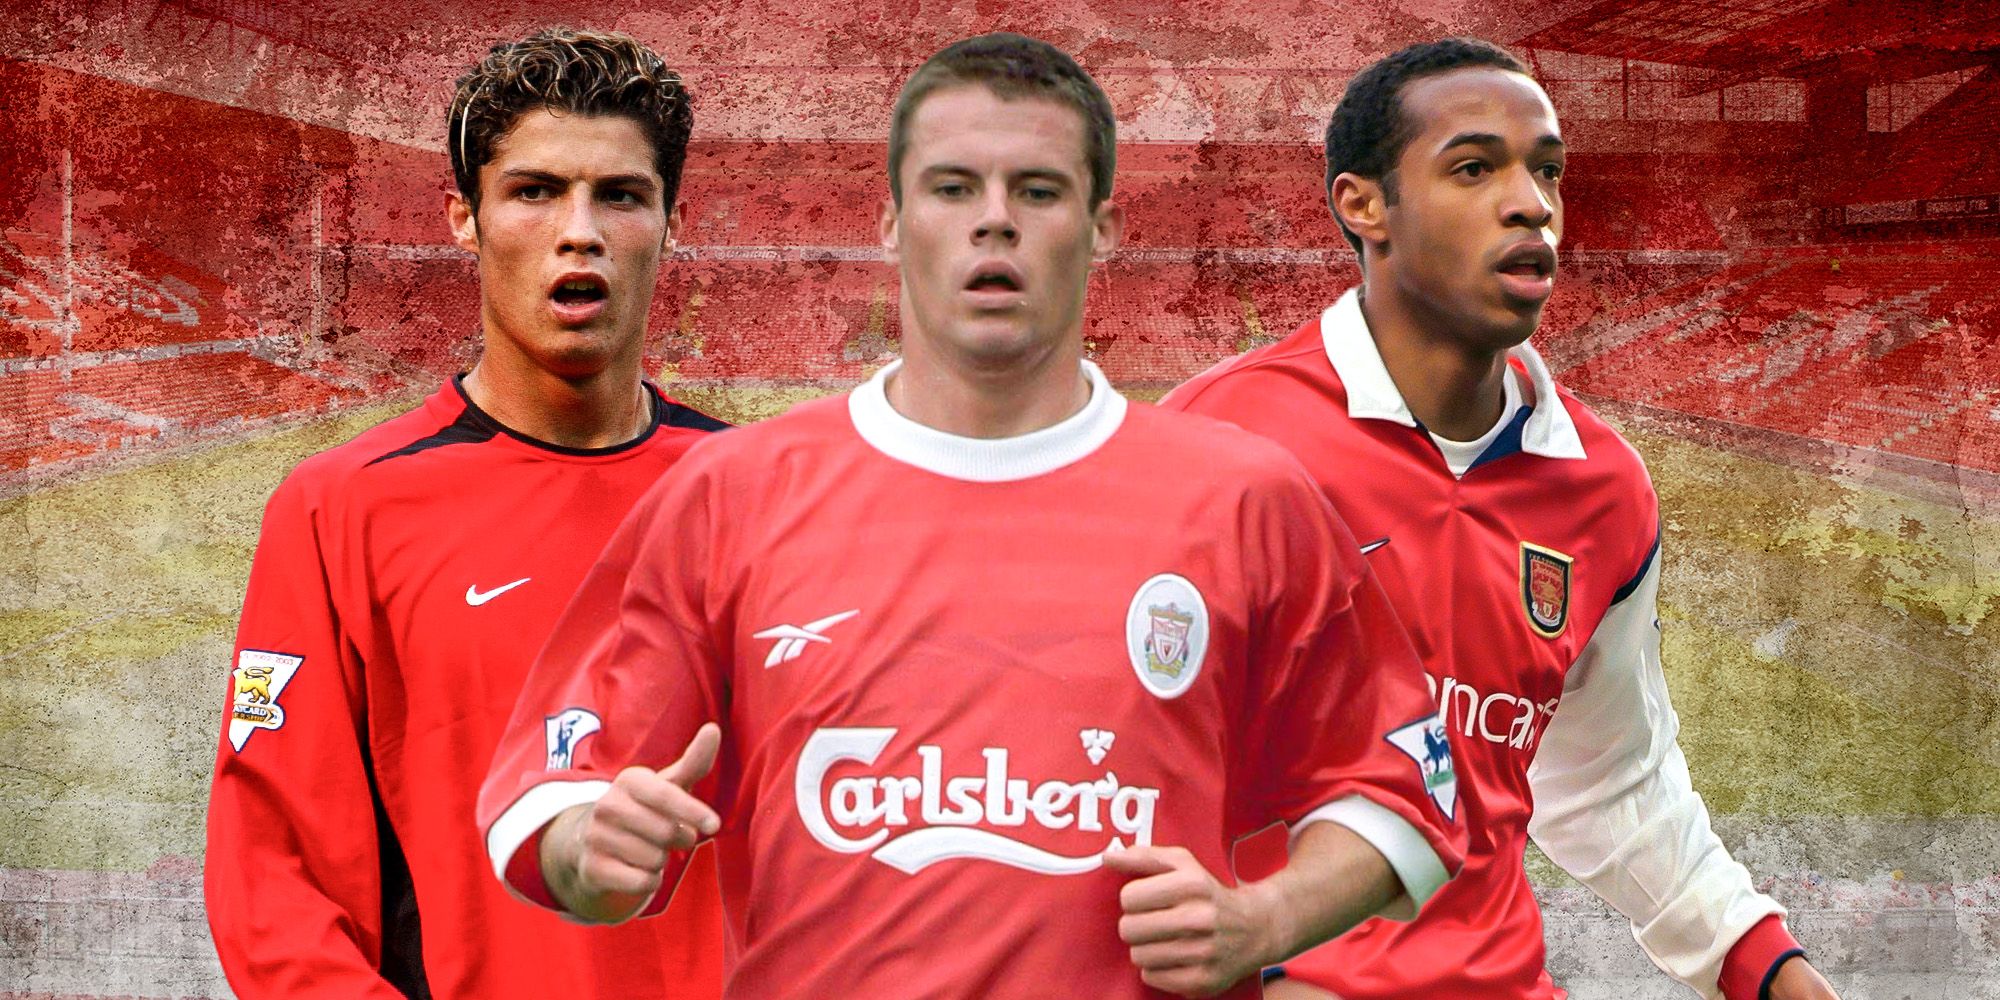 Jamie Carragher in Liverpool kit  on either side, Thierry Henry (Arsenal), Cristiano Ronaldo (Manchester United)